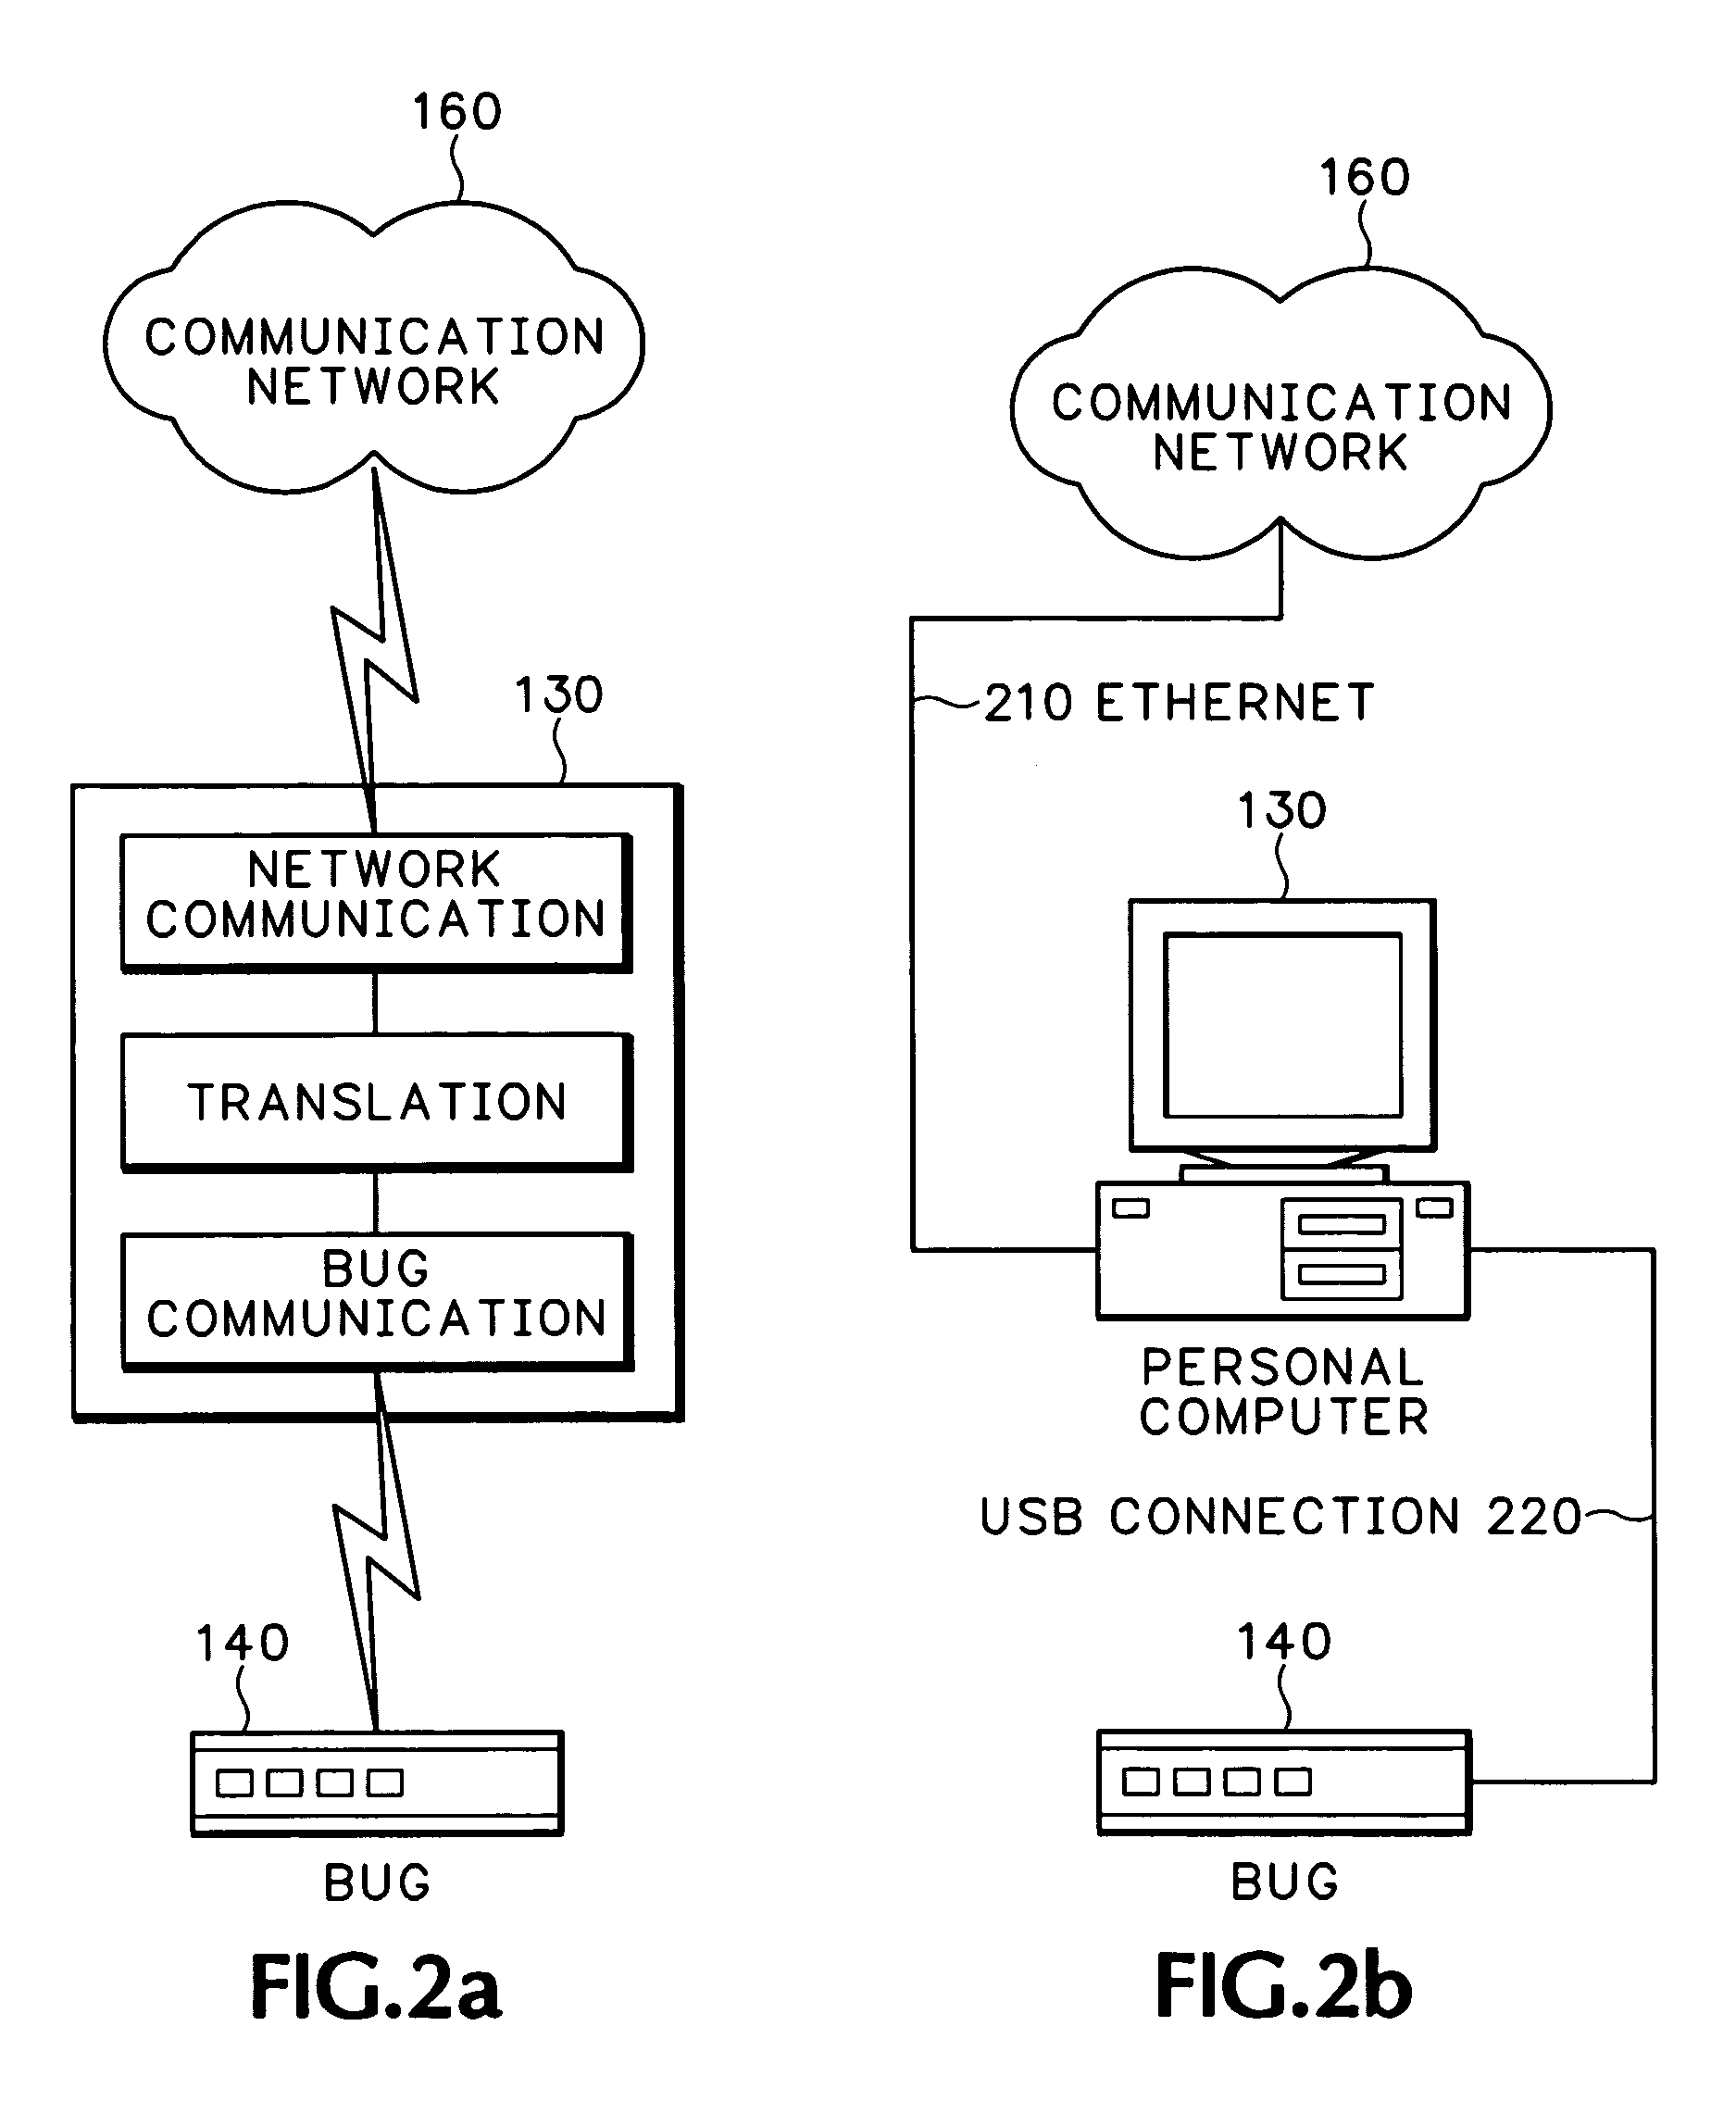 System for regulating exercise and exercise network